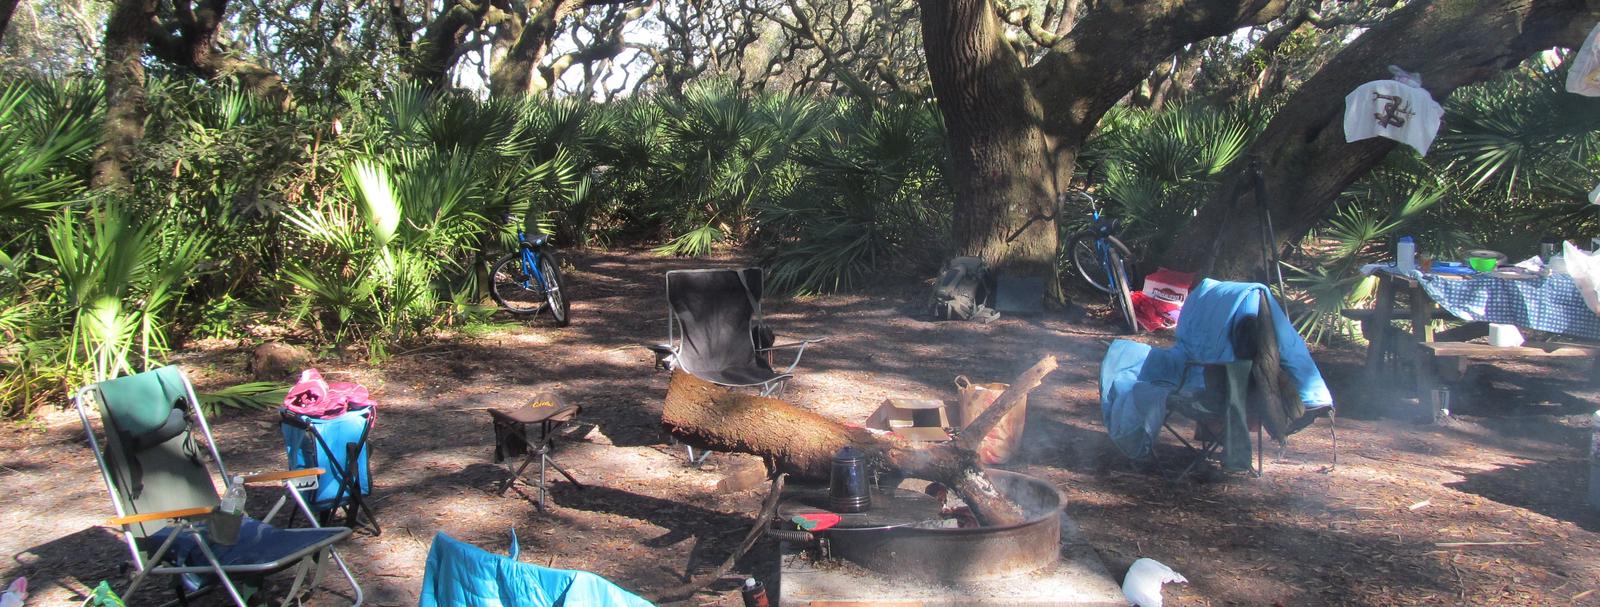 campsite with picnic table, food cage, and fire ring under live oak treesSea Camp site 12